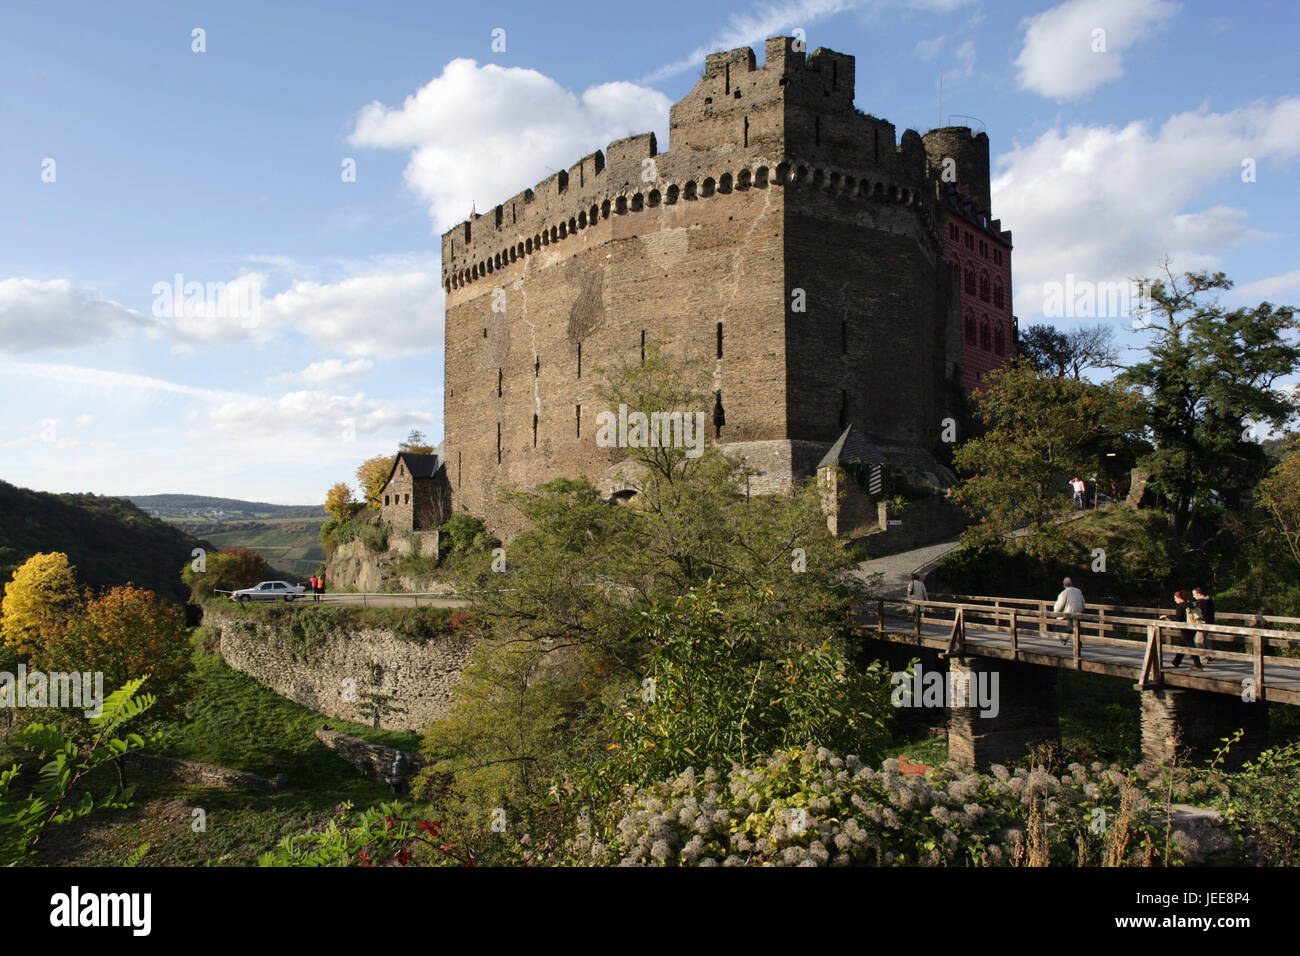 Germany, Rhineland-Palatinate, Oberwesel on the Rhine, castle nice castle, autumn, Rhine Valley, hill, castle grounds, donjon, military attachment, building, structure, architecture, destination, culture, place of interest, icon, Middle Ages, knighthood, Stock Photo